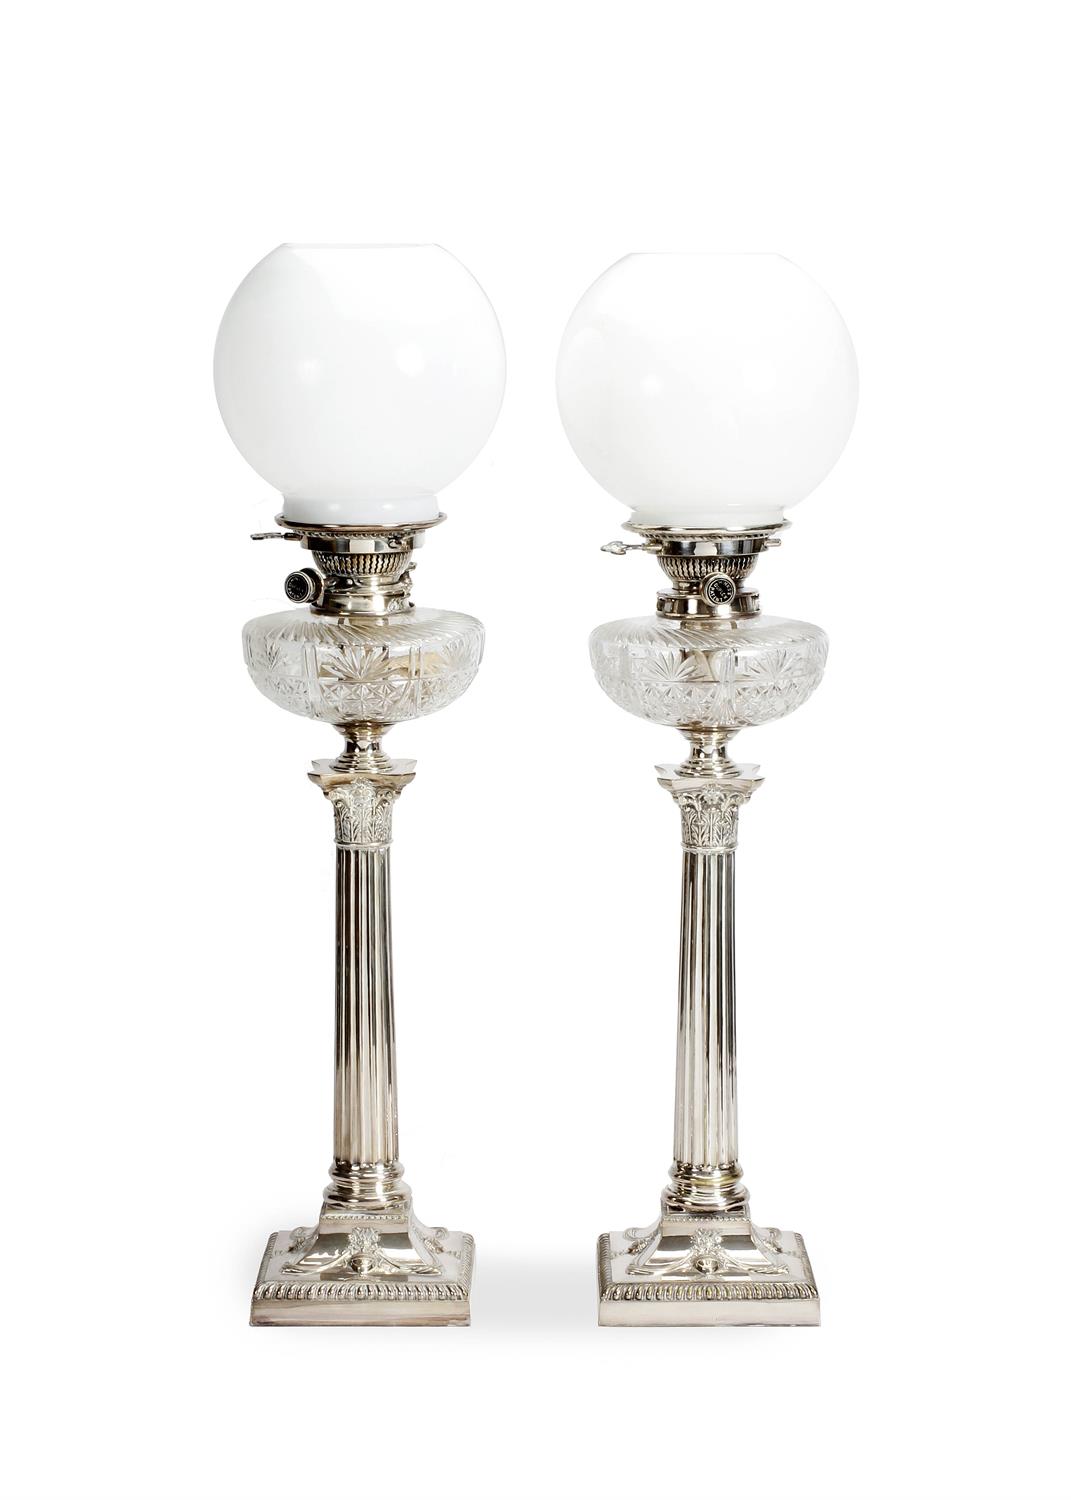 Lot 8 - A PAIR OF 19TH CENTURY OIL LAMPS with globular white glass shades supported on Hinks patent duplex b